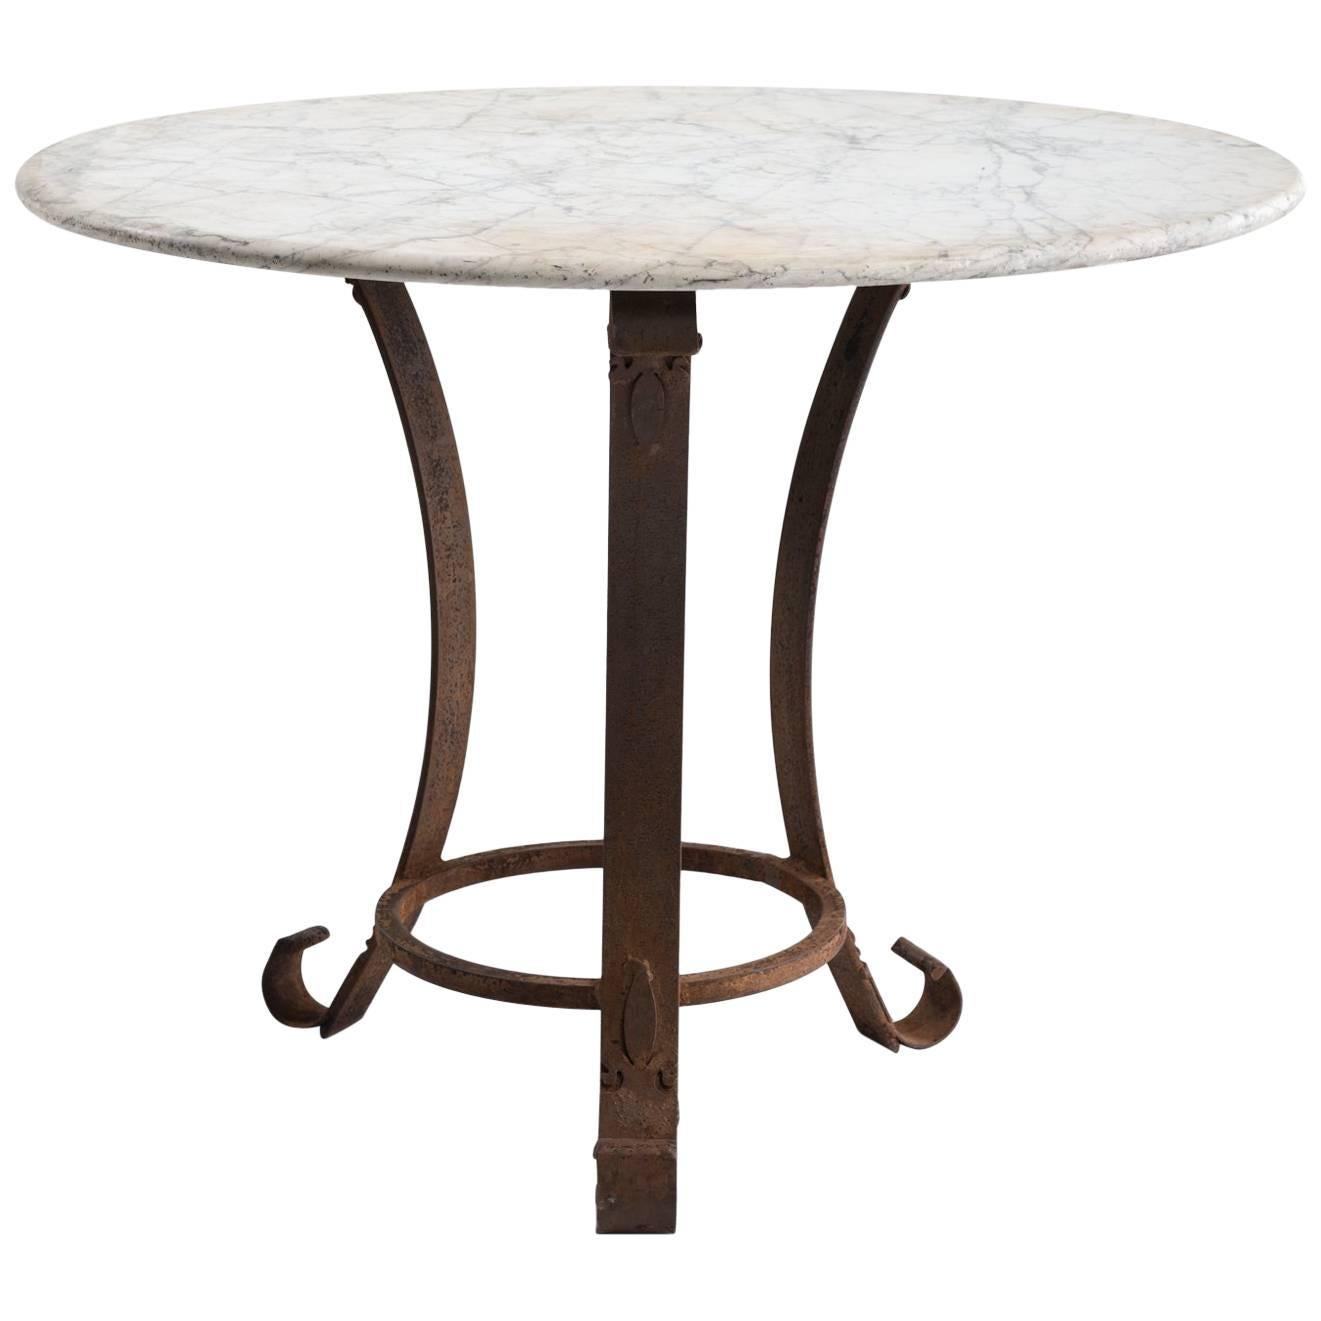 Iron and Marble Centre Table, circa 1890